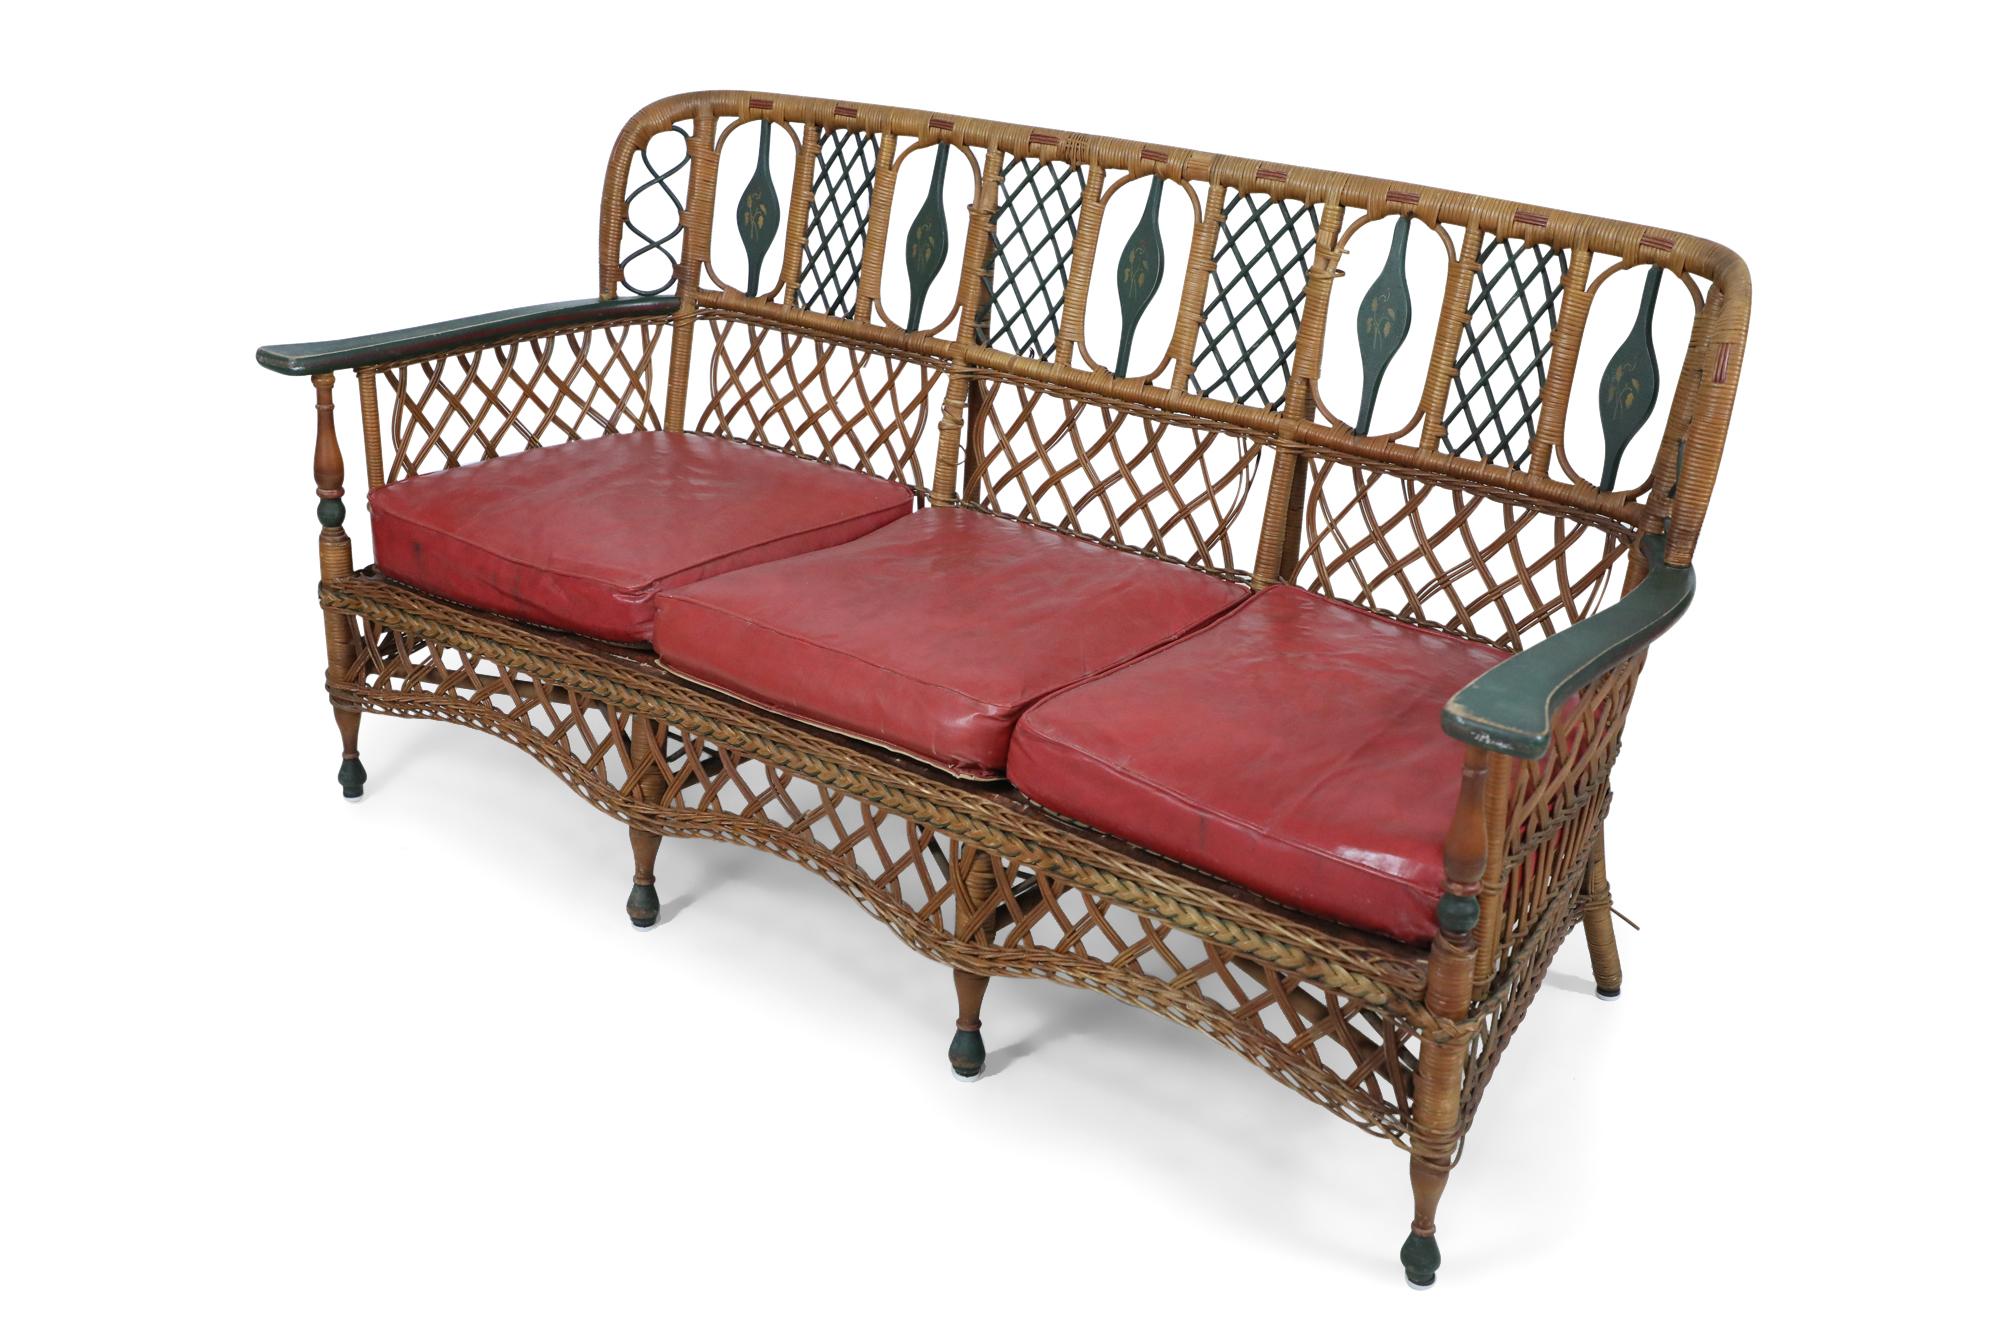 7 piece American Art Deco natural wicker porch / living room set, composed of a filigree design 3-seat sofa and 2 matching armchairs have green painted trim, and 2 side chairs all with red vinyl cushions; match the red & green painted bookshelf and